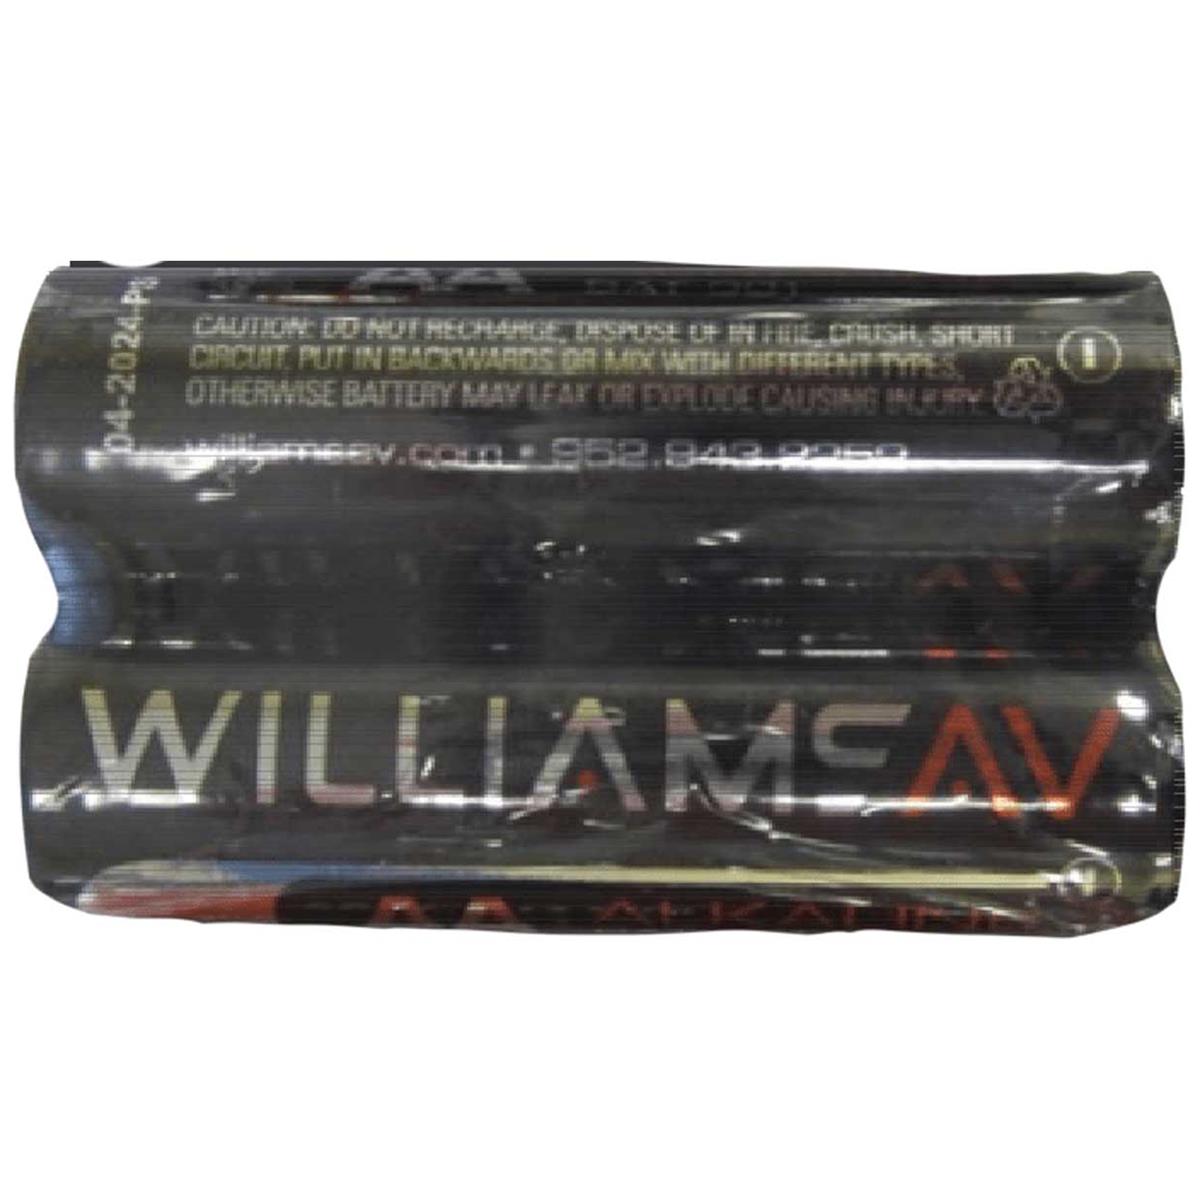 Image of Williams Sound AA 1.2V Alkaline Battery